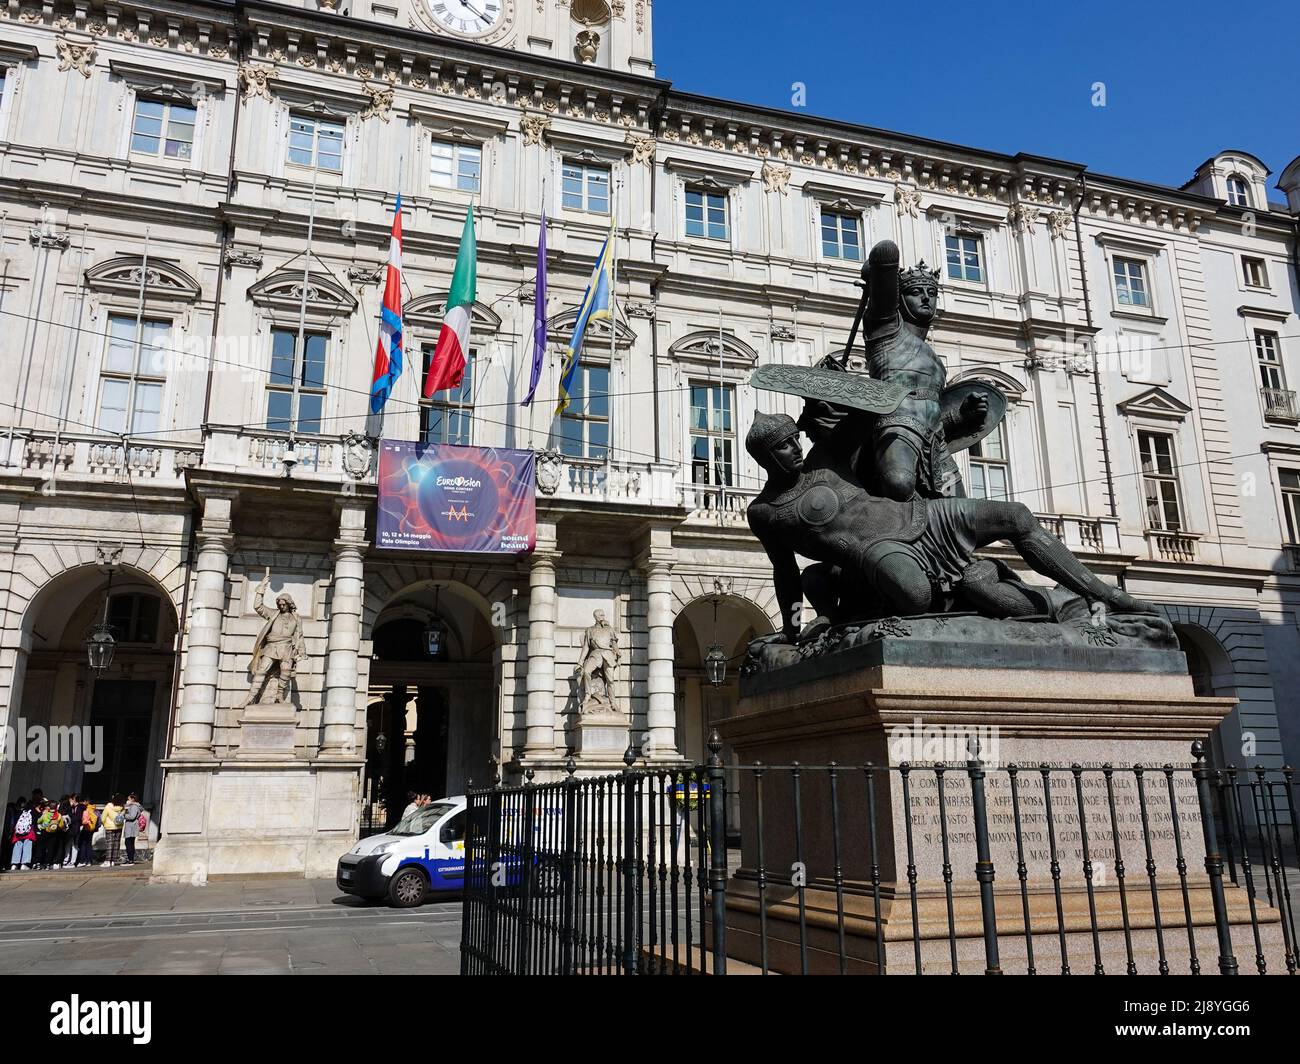 City hall of Turin, Italy with statue of the Green Count, Amadeus VI, Count of Savoy, plus sign for the Eurovision song finals, held in Turin in 2022. Stock Photo